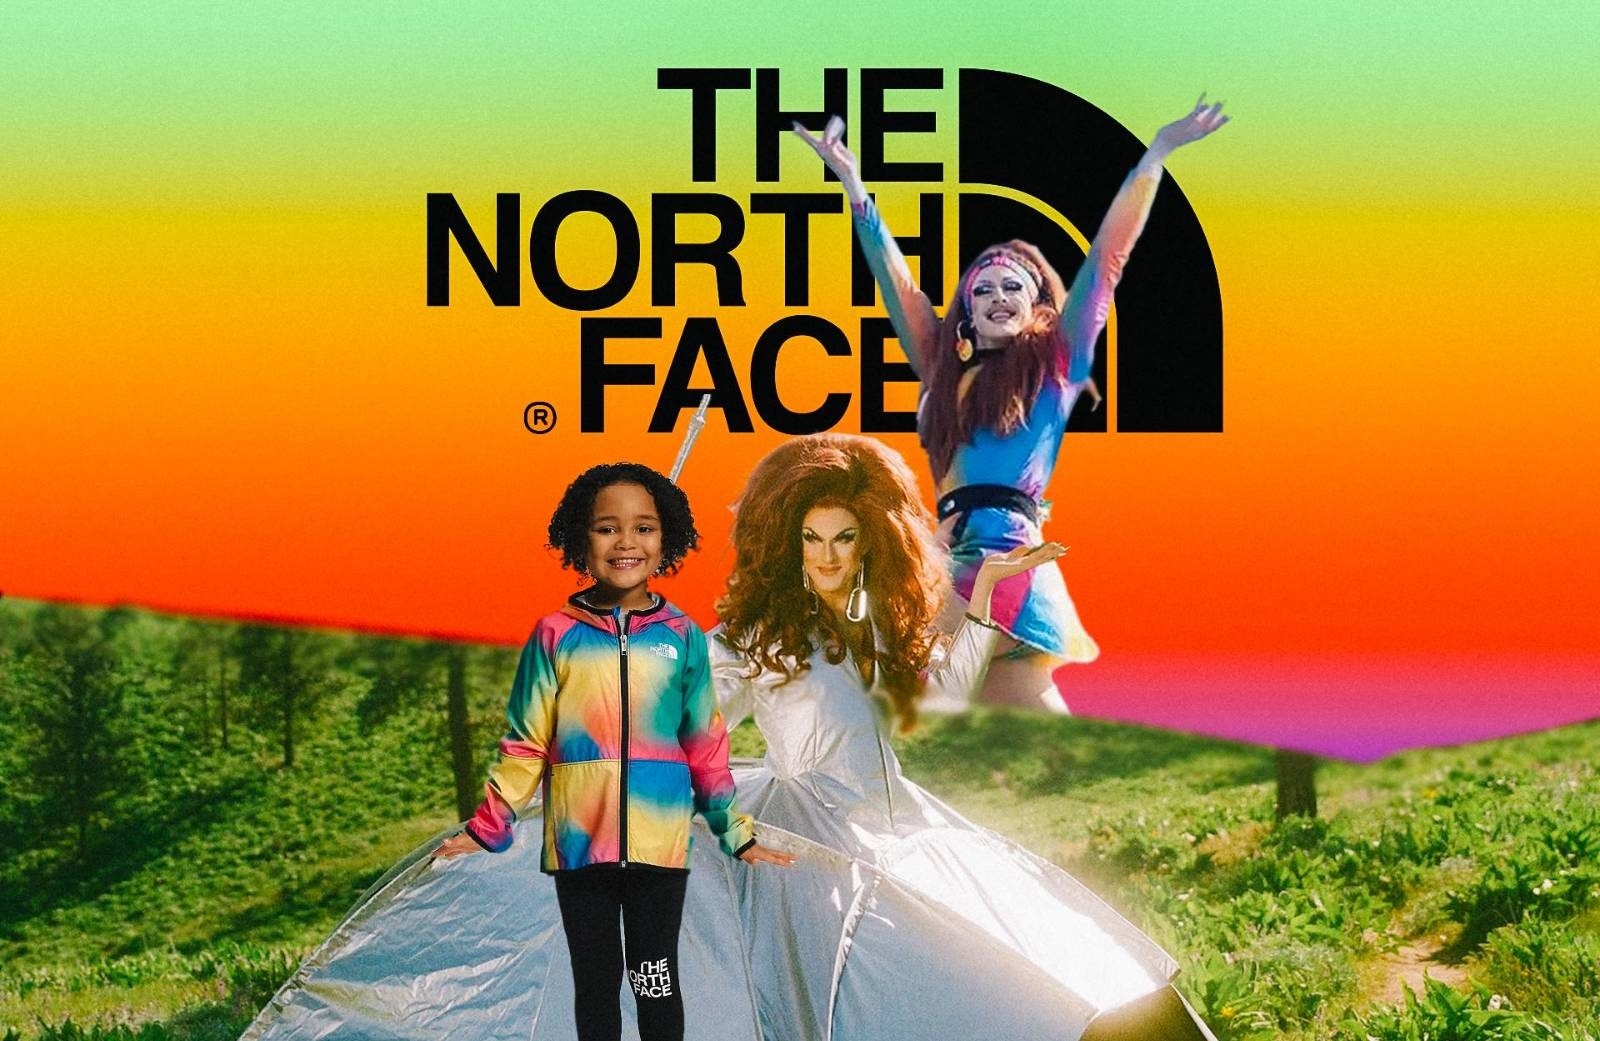 The North Face Releases New Pride Ad With Drag Queen Pattie Gonia The